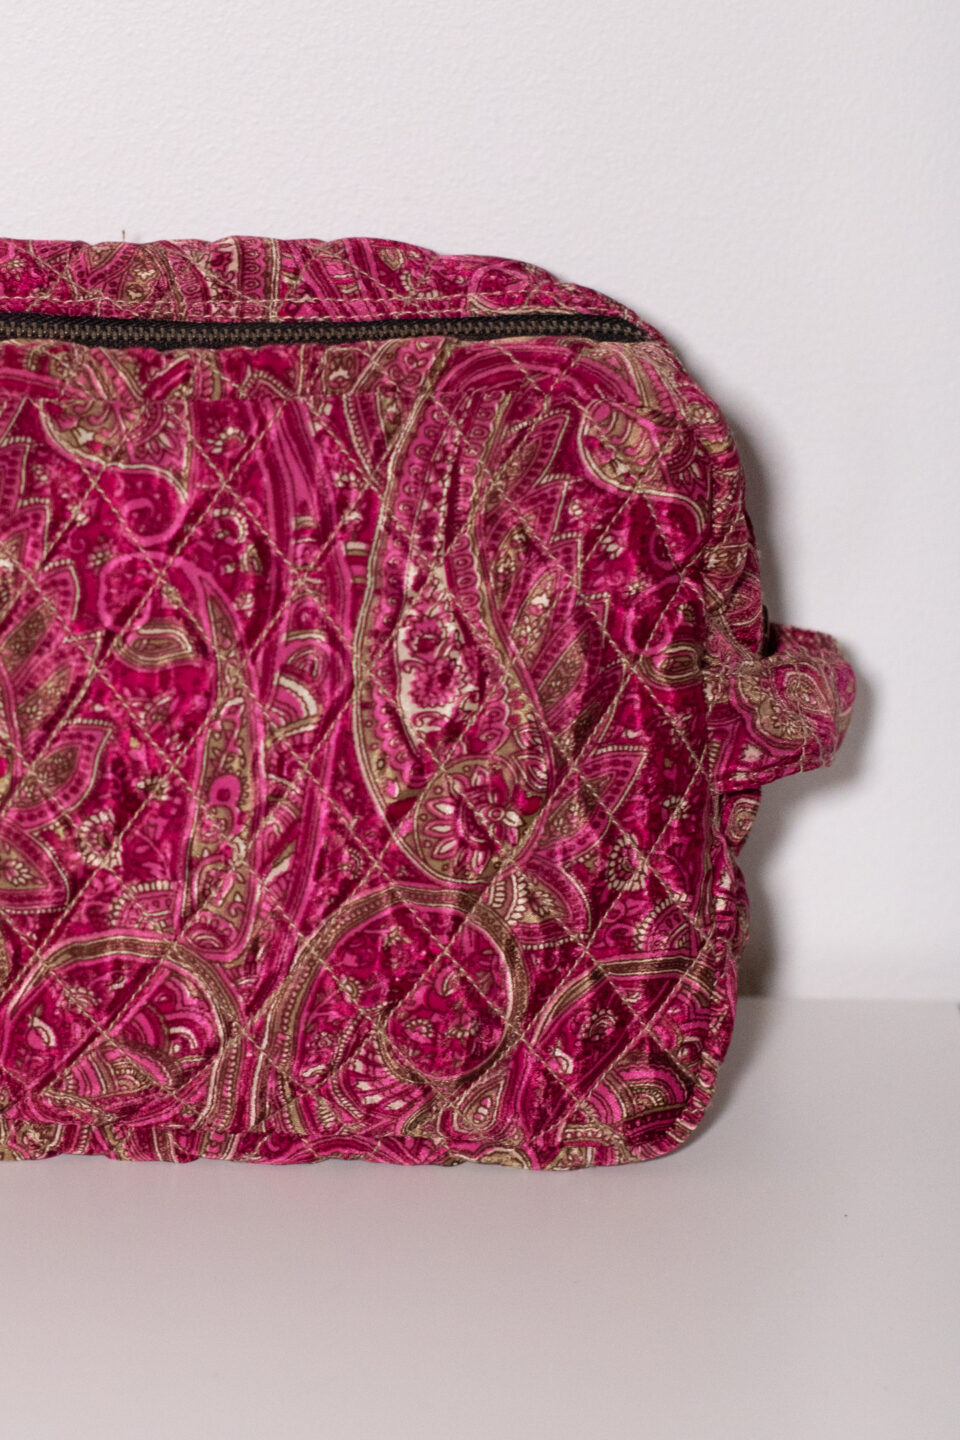 Upcycled Silk Sari Travel Pouch - Hot Pink